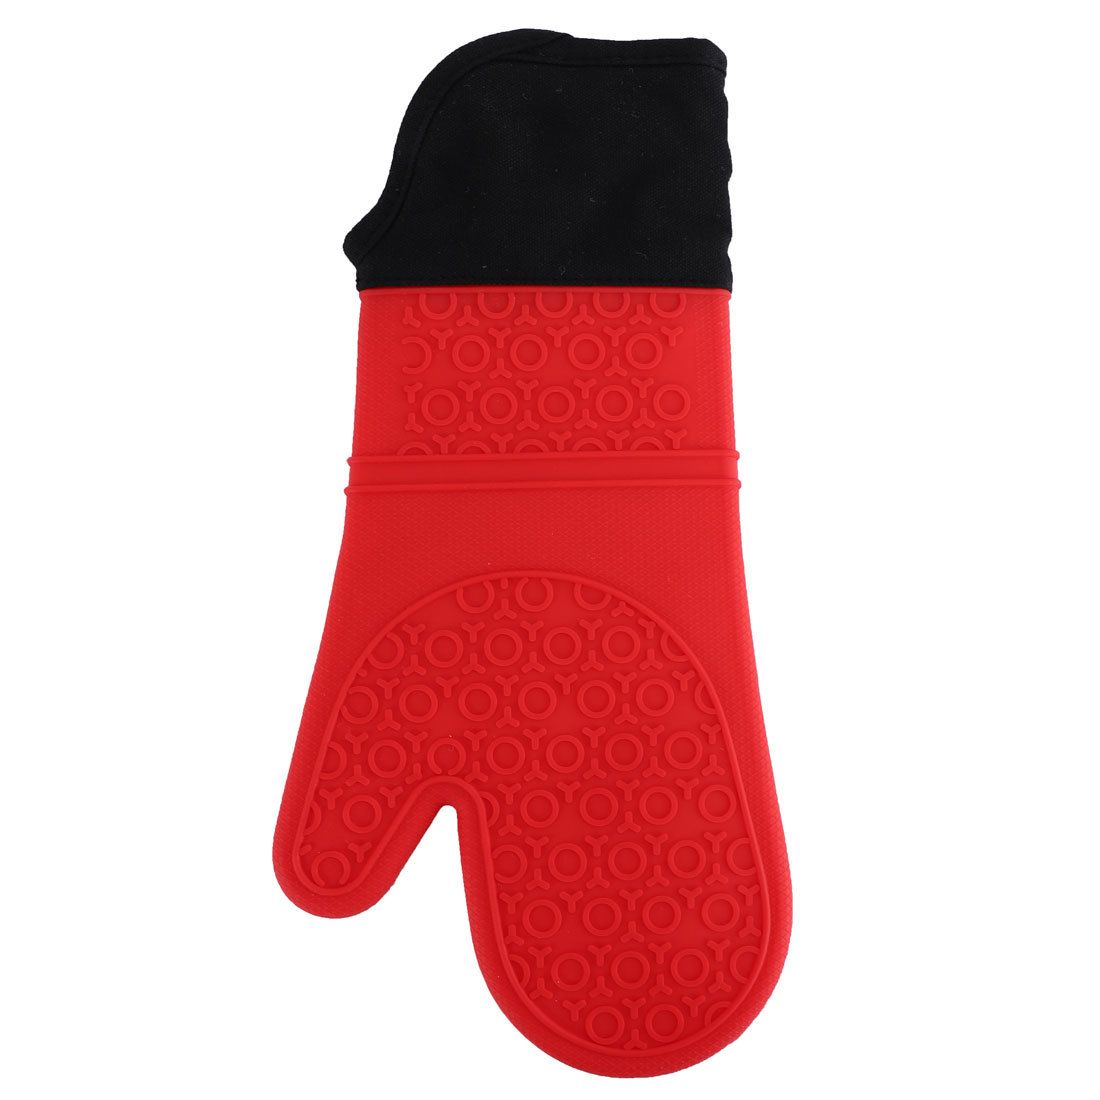 Zulay Kitchen Extra Long Silicone Oven Mitts - Red